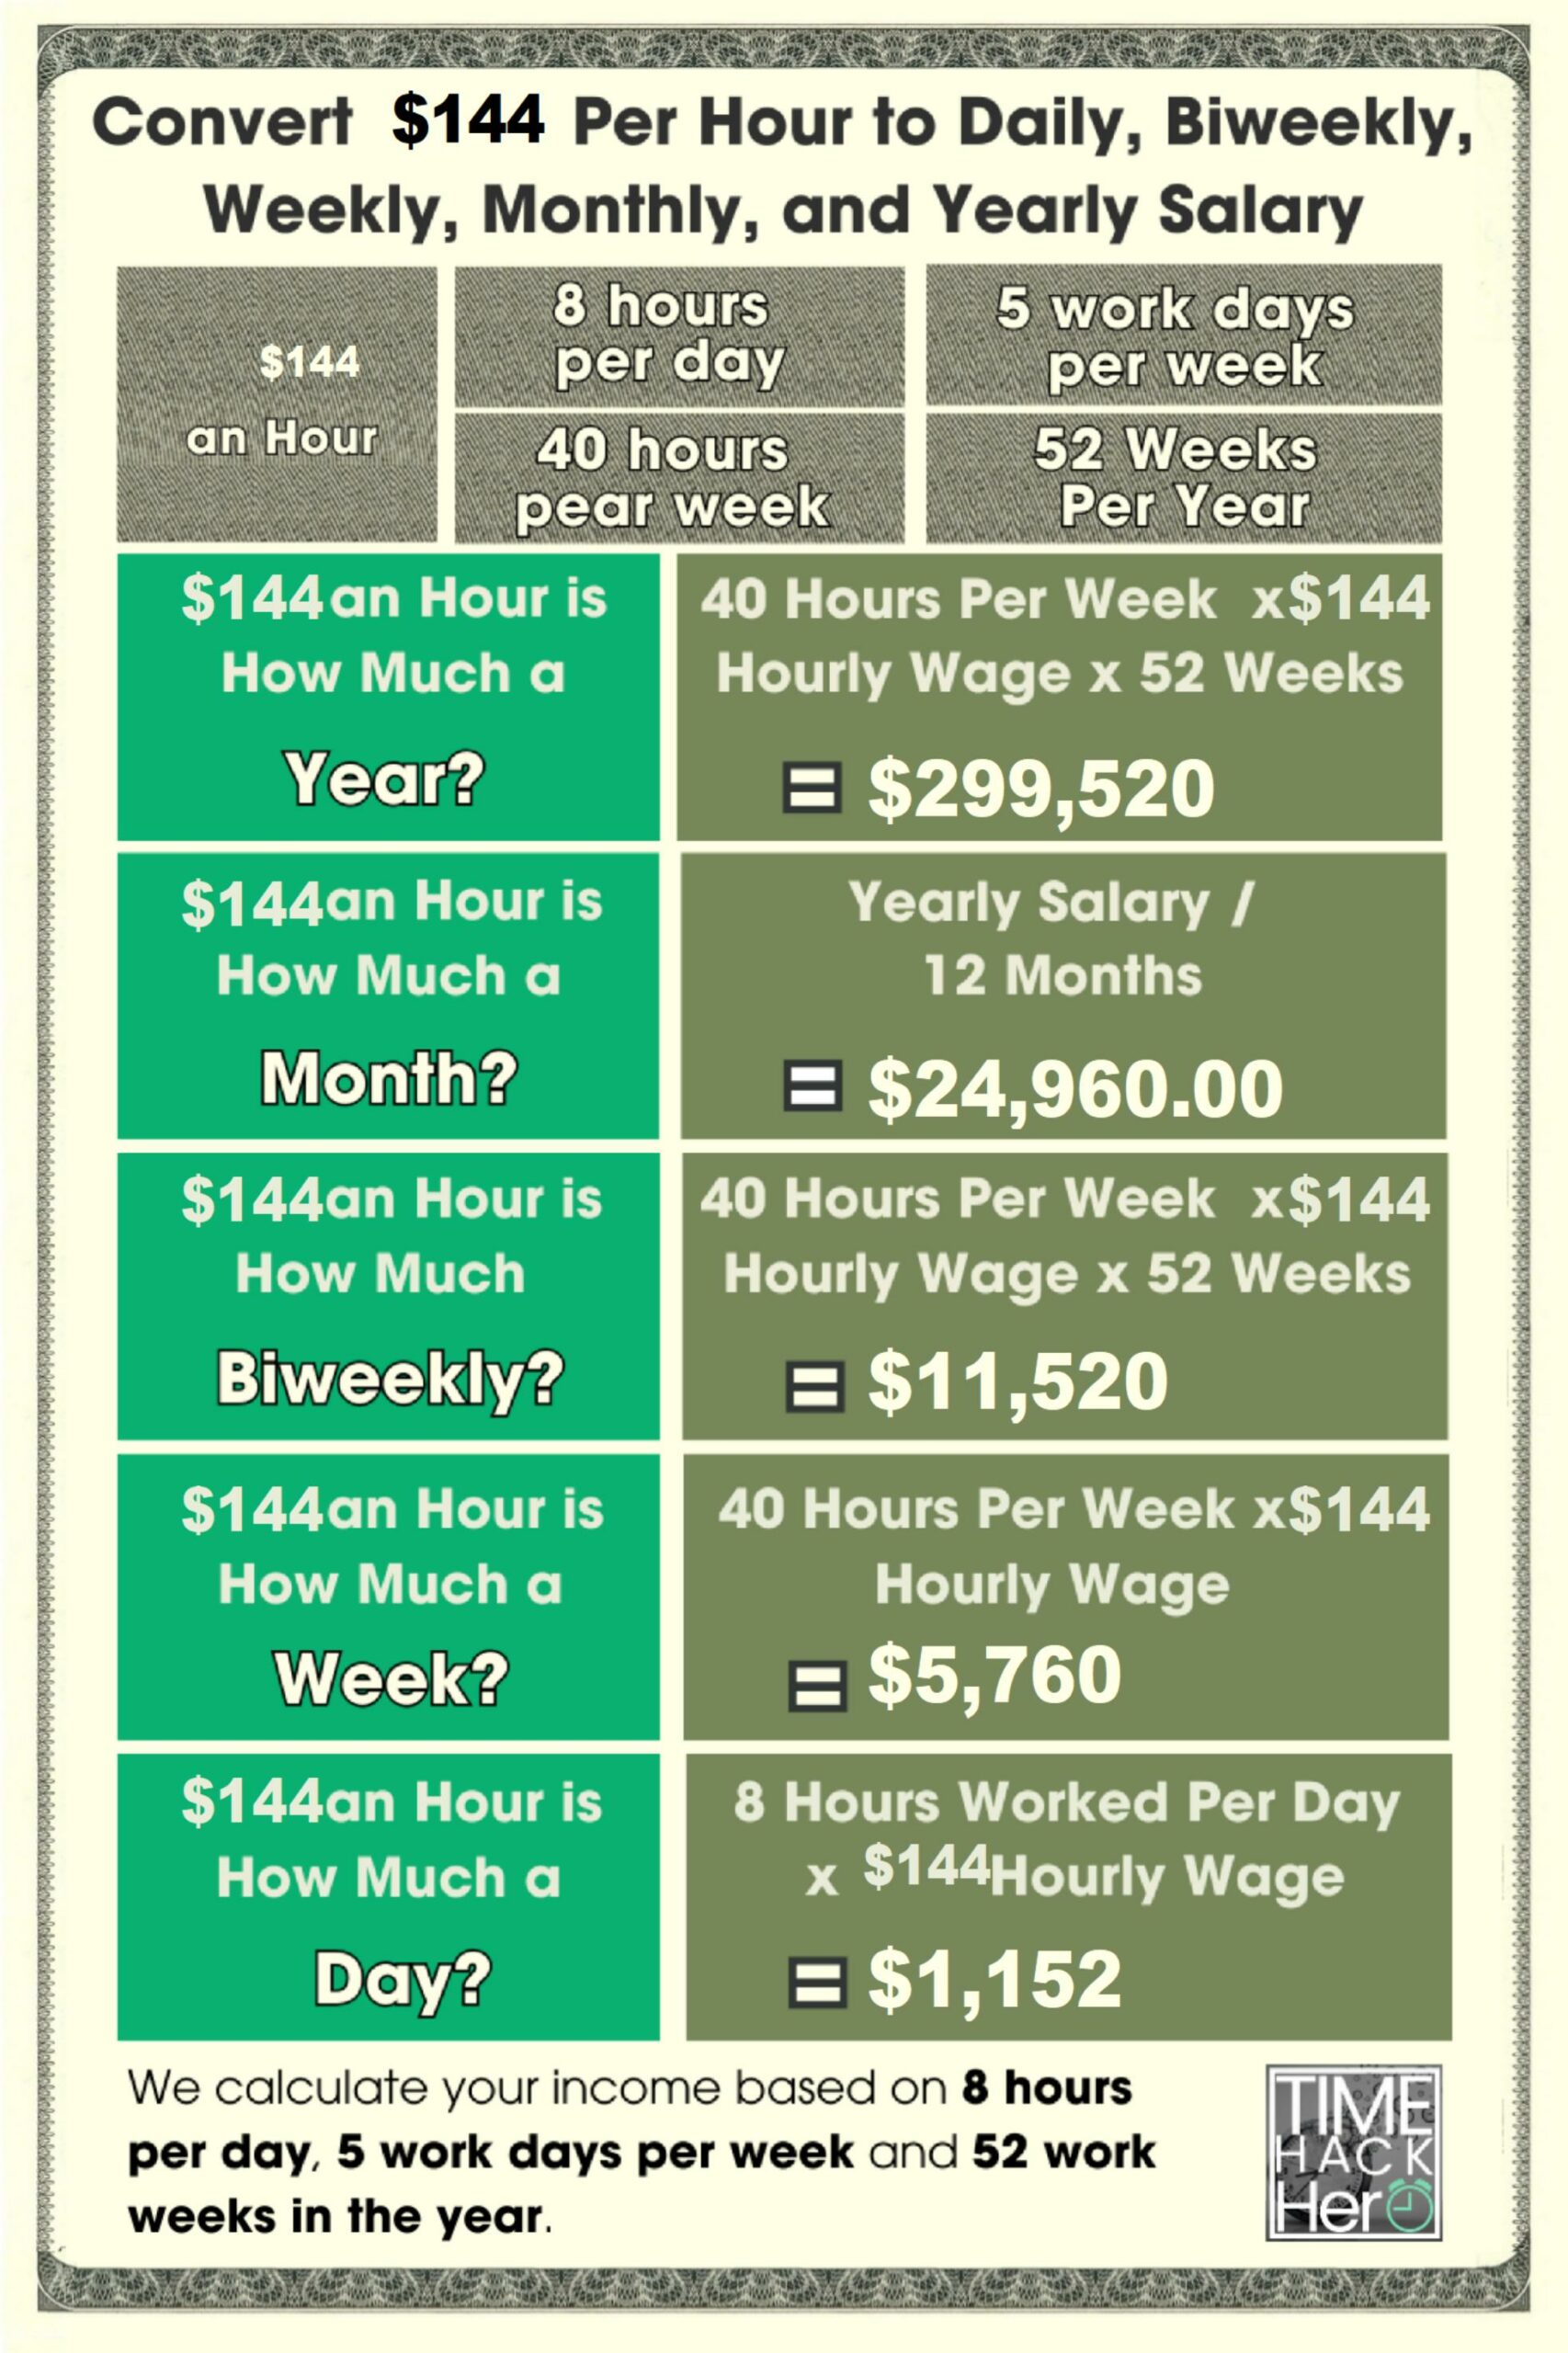 Convert $144 Per Hour to Weekly, Monthly, and Yearly Salary